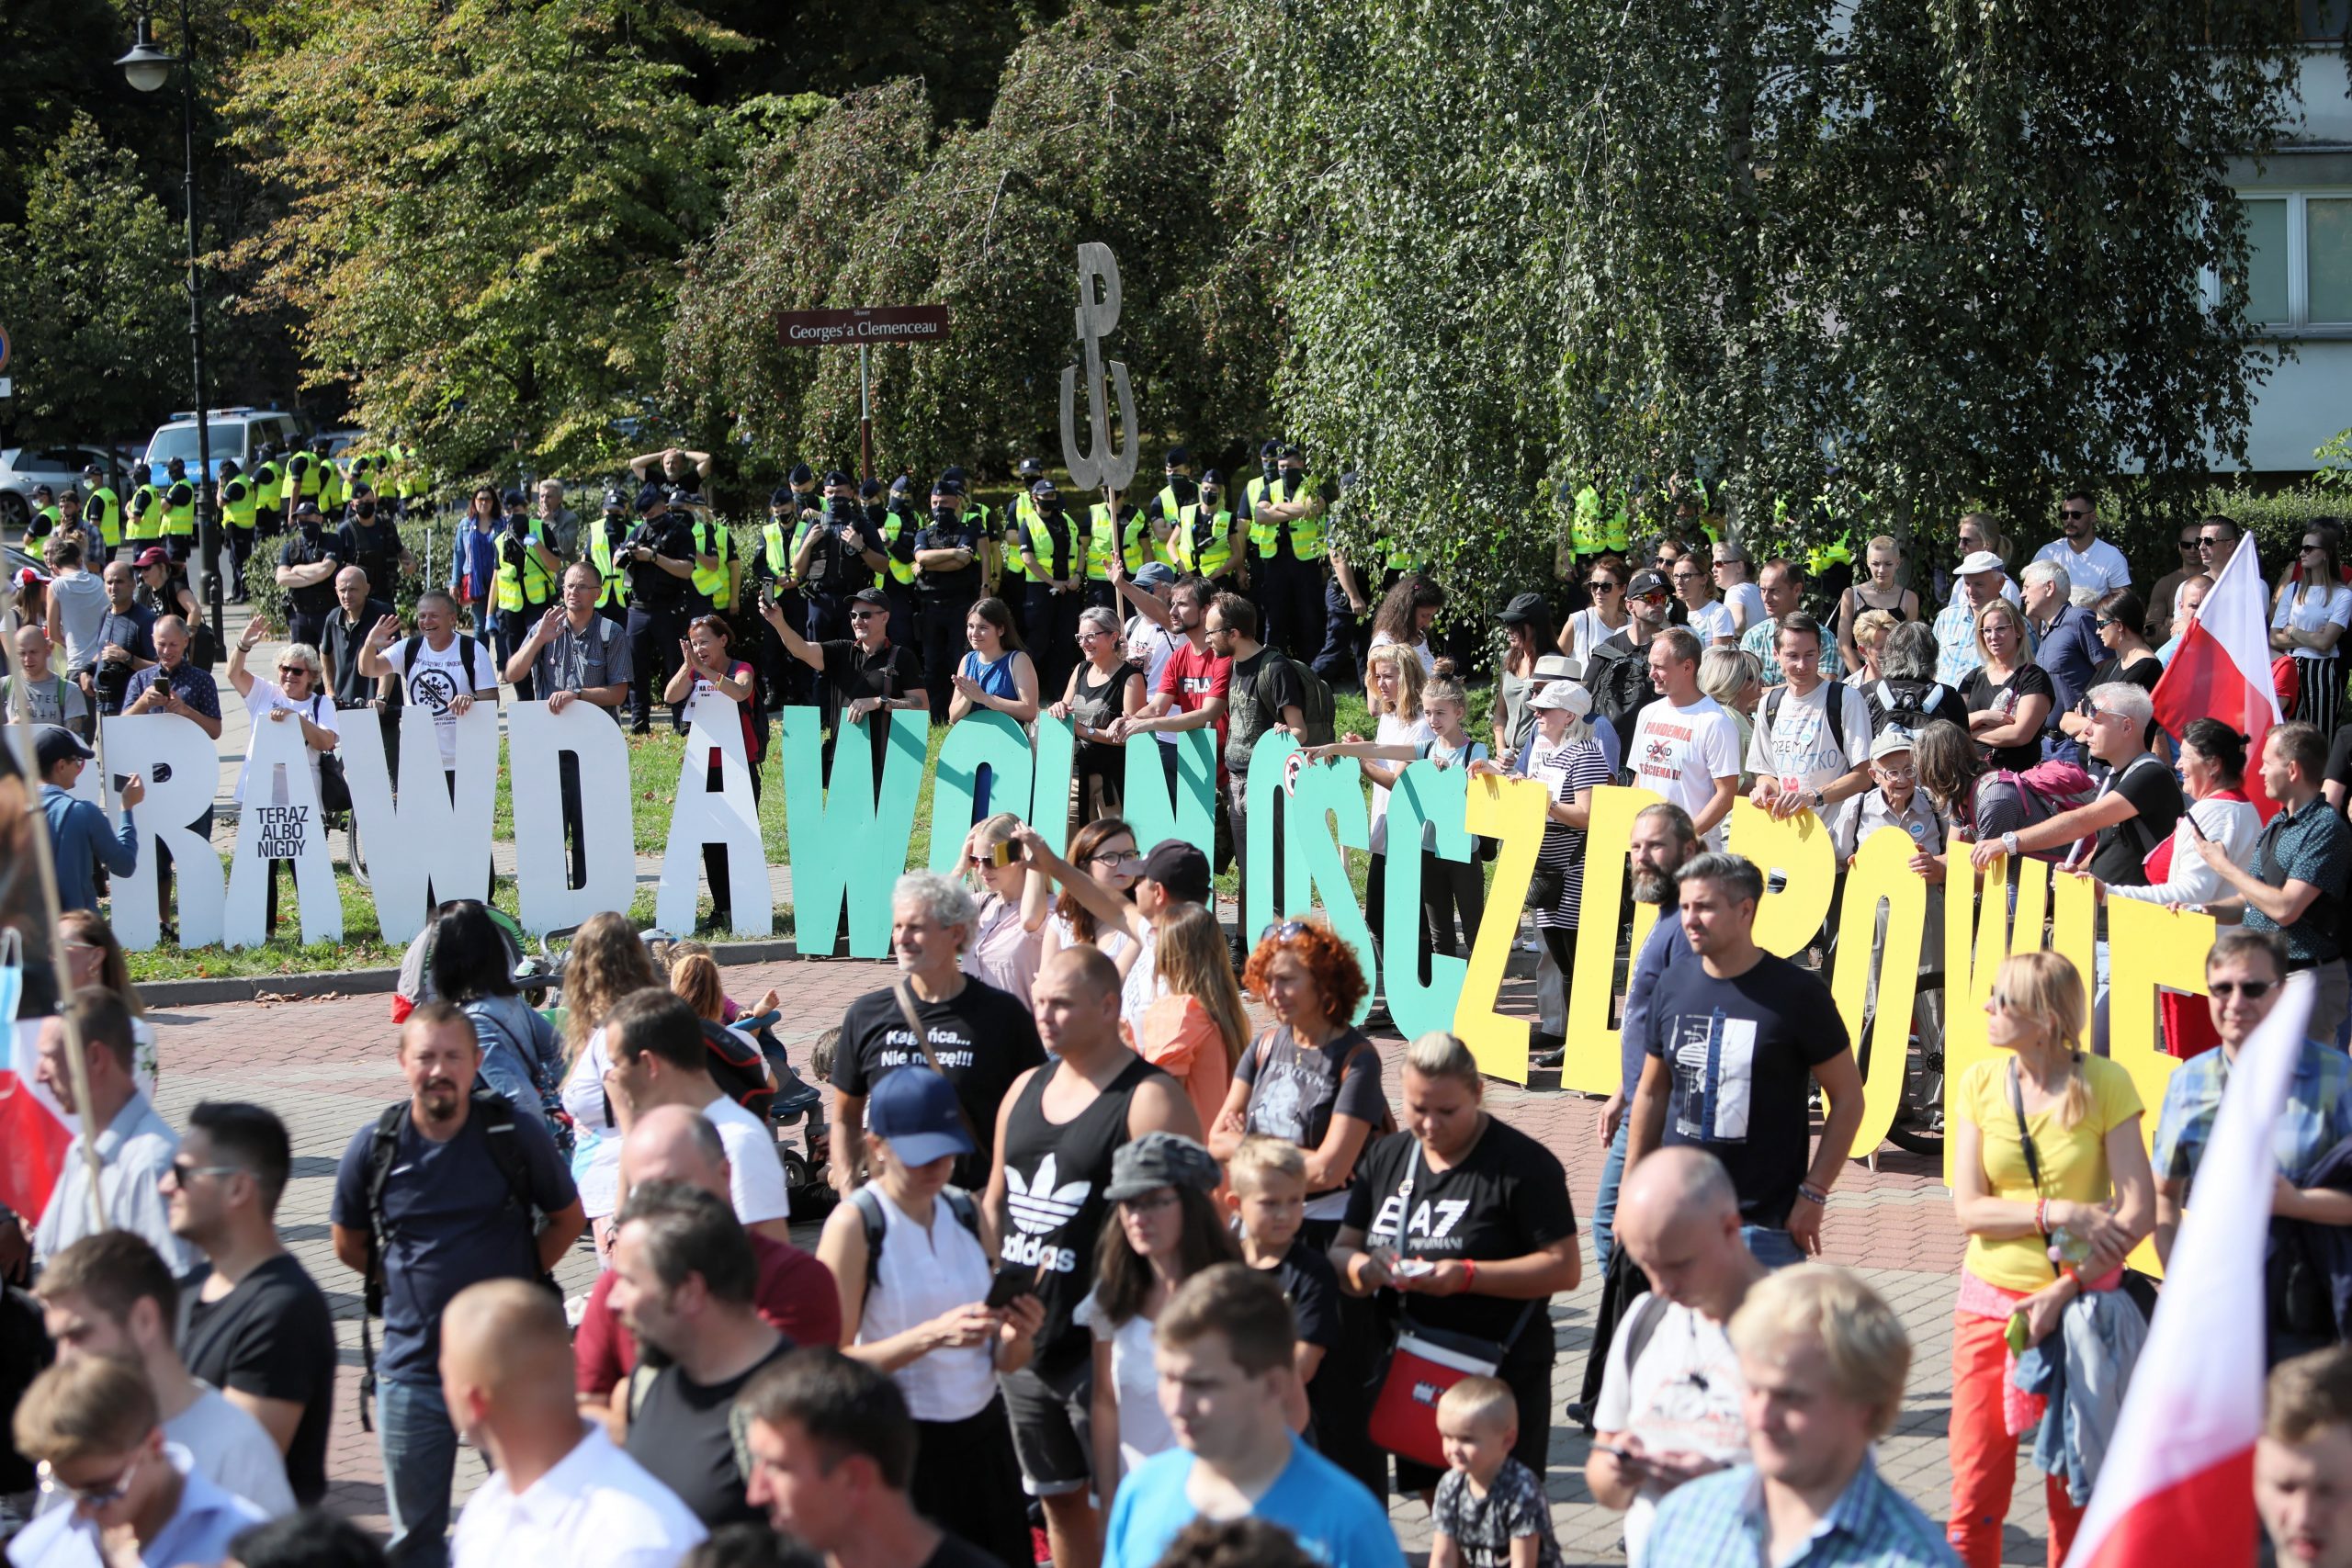 epa08663419 People with huge words 'Truth, Freedom and Health' take part in the 'End the Pandemic' march in the center of Warsaw, Poland, 12 September 2020. People demonstrate against the restrictions introduced by the Polish government in connection with the spread of the pandemic COVID-19 disease caused by the SARS-CoV-2 coronavirus.  EPA/LESZEK SZYMANSKI POLAND OUT